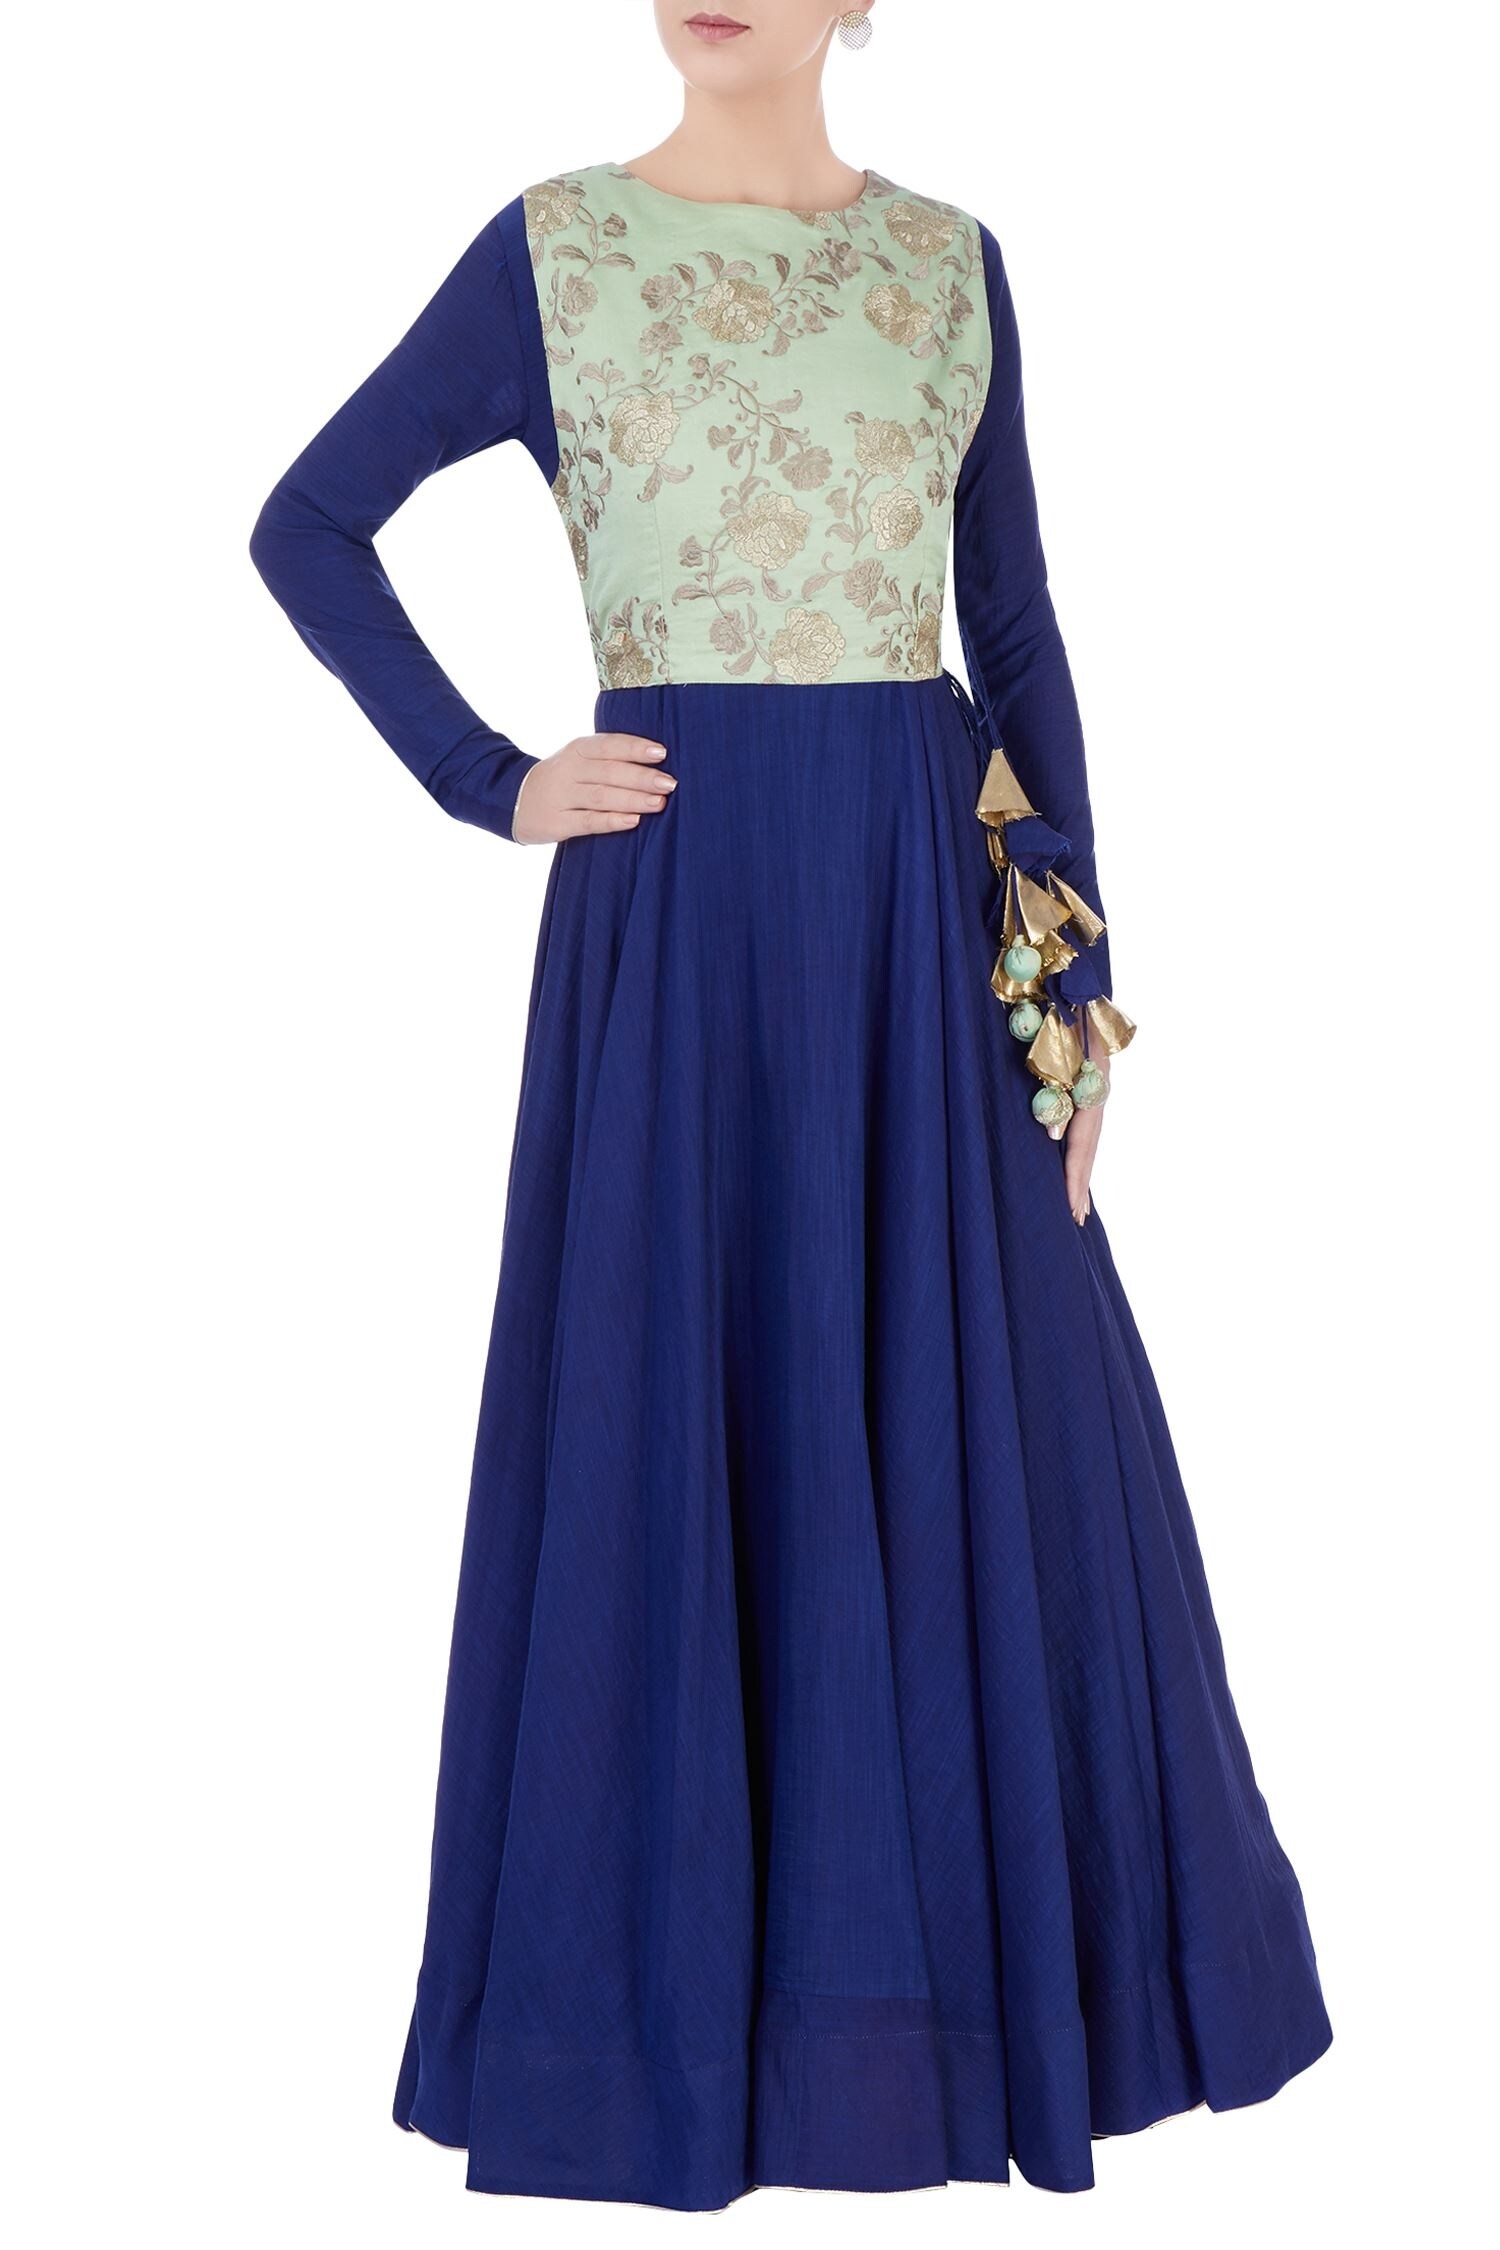 Buy Blue anarkali with floral embroidered top by Aksh at Aza Fashions